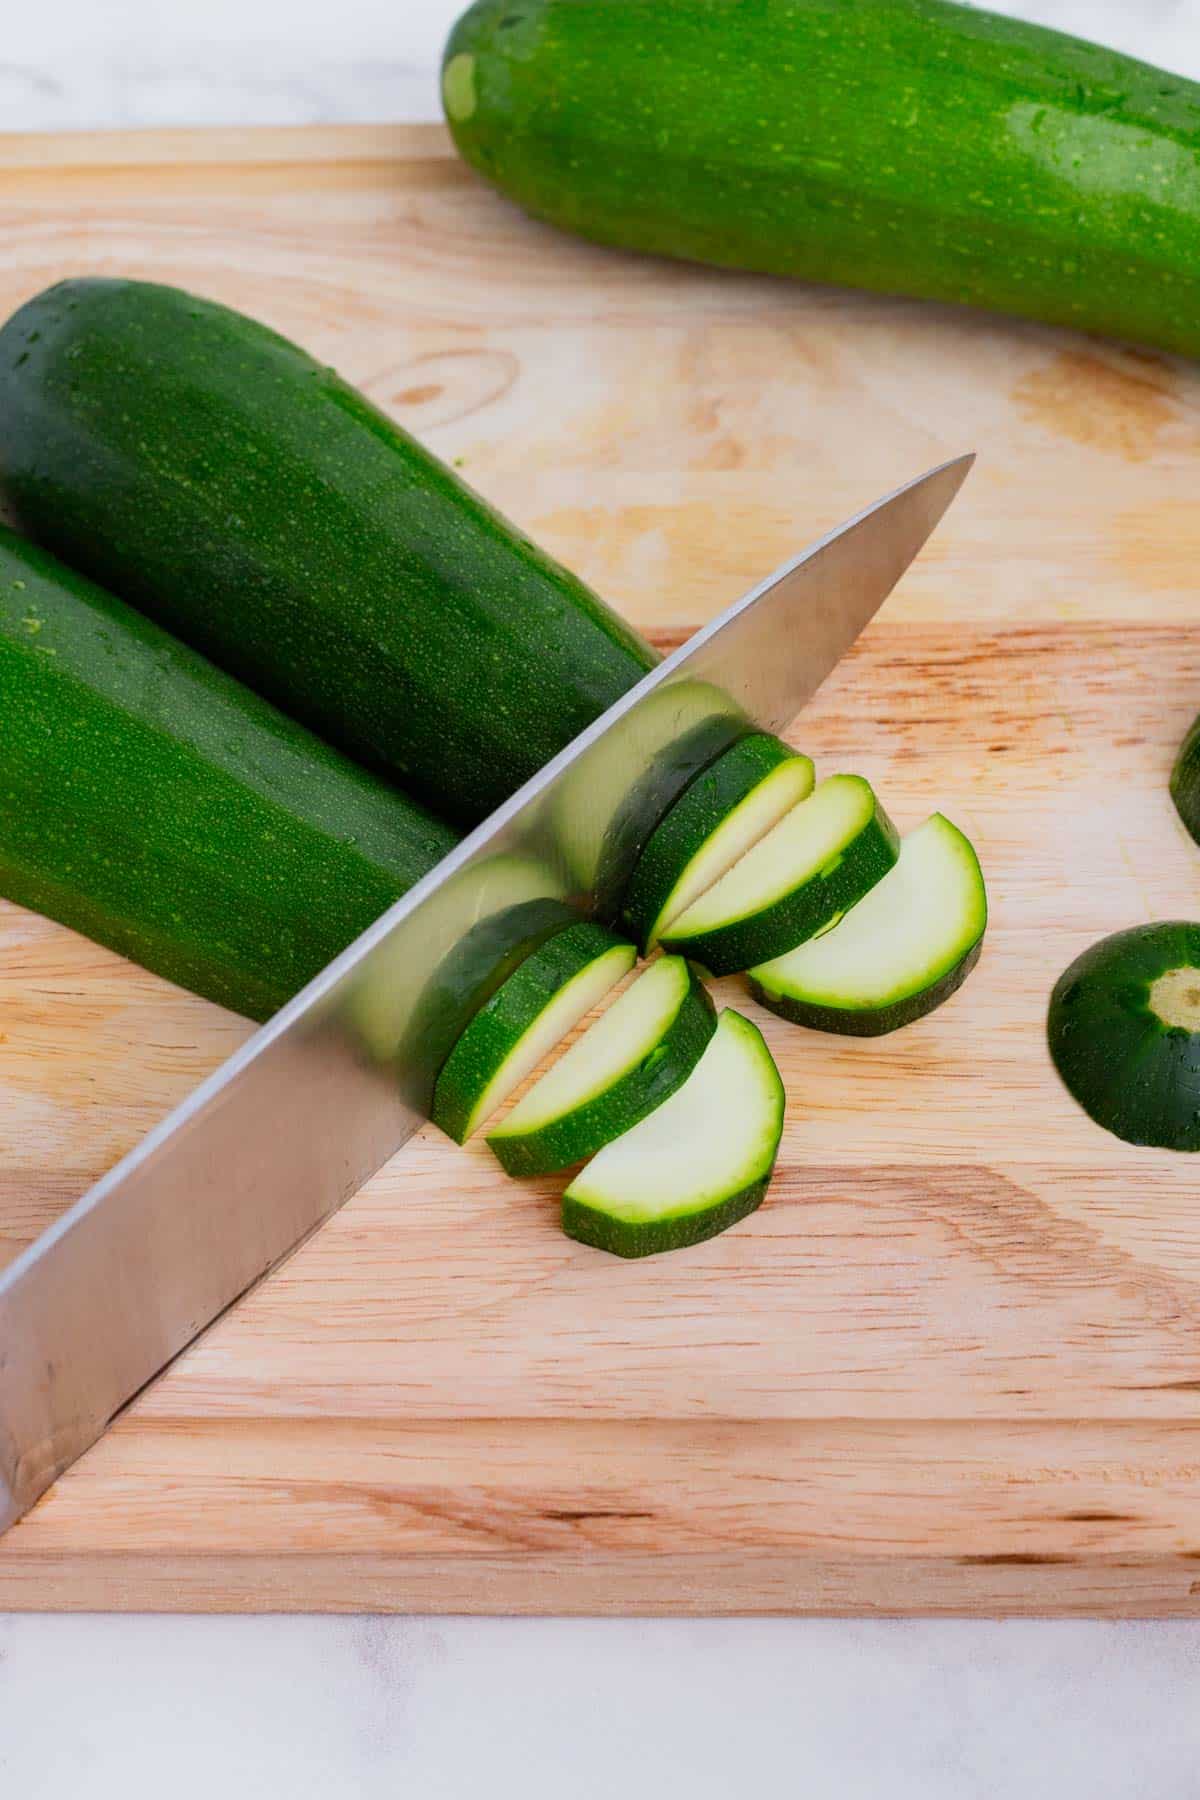 Zucchini being cut in half slices with a knife.